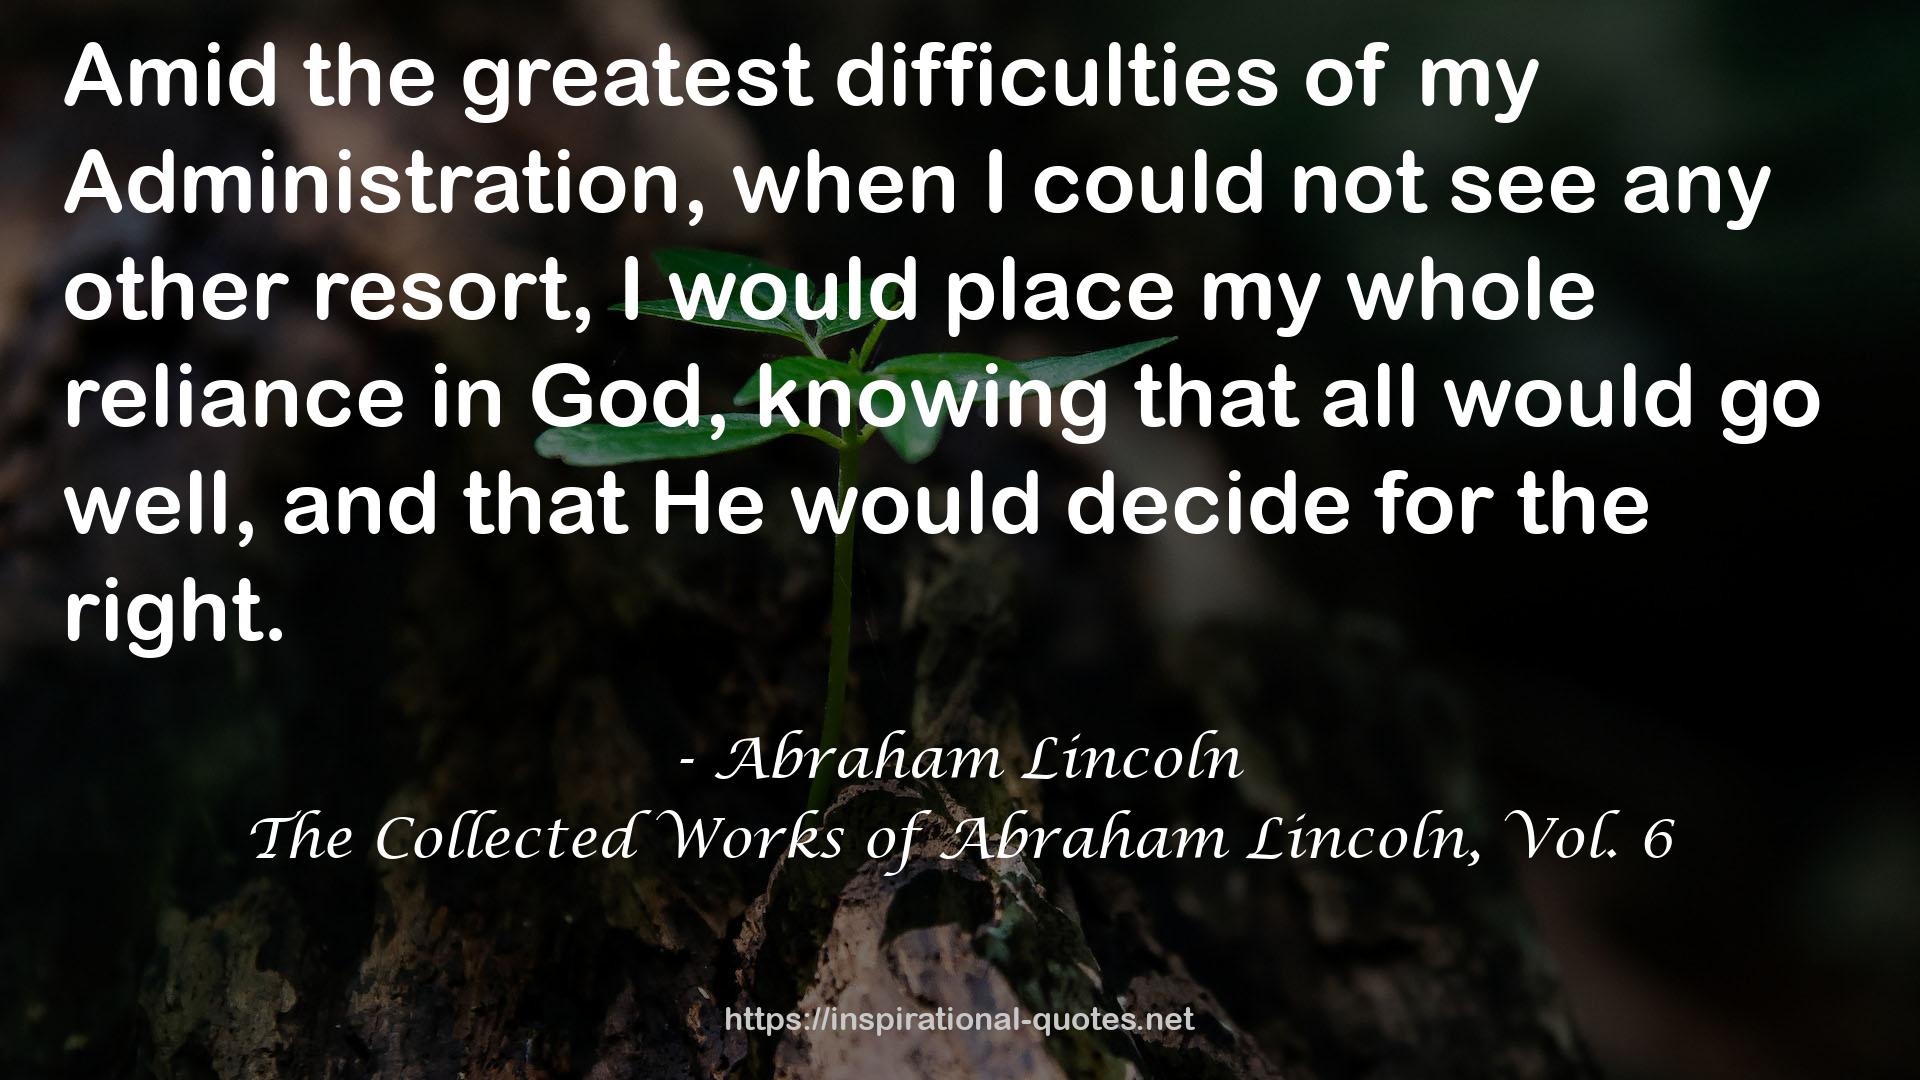 The Collected Works of Abraham Lincoln, Vol. 6 QUOTES